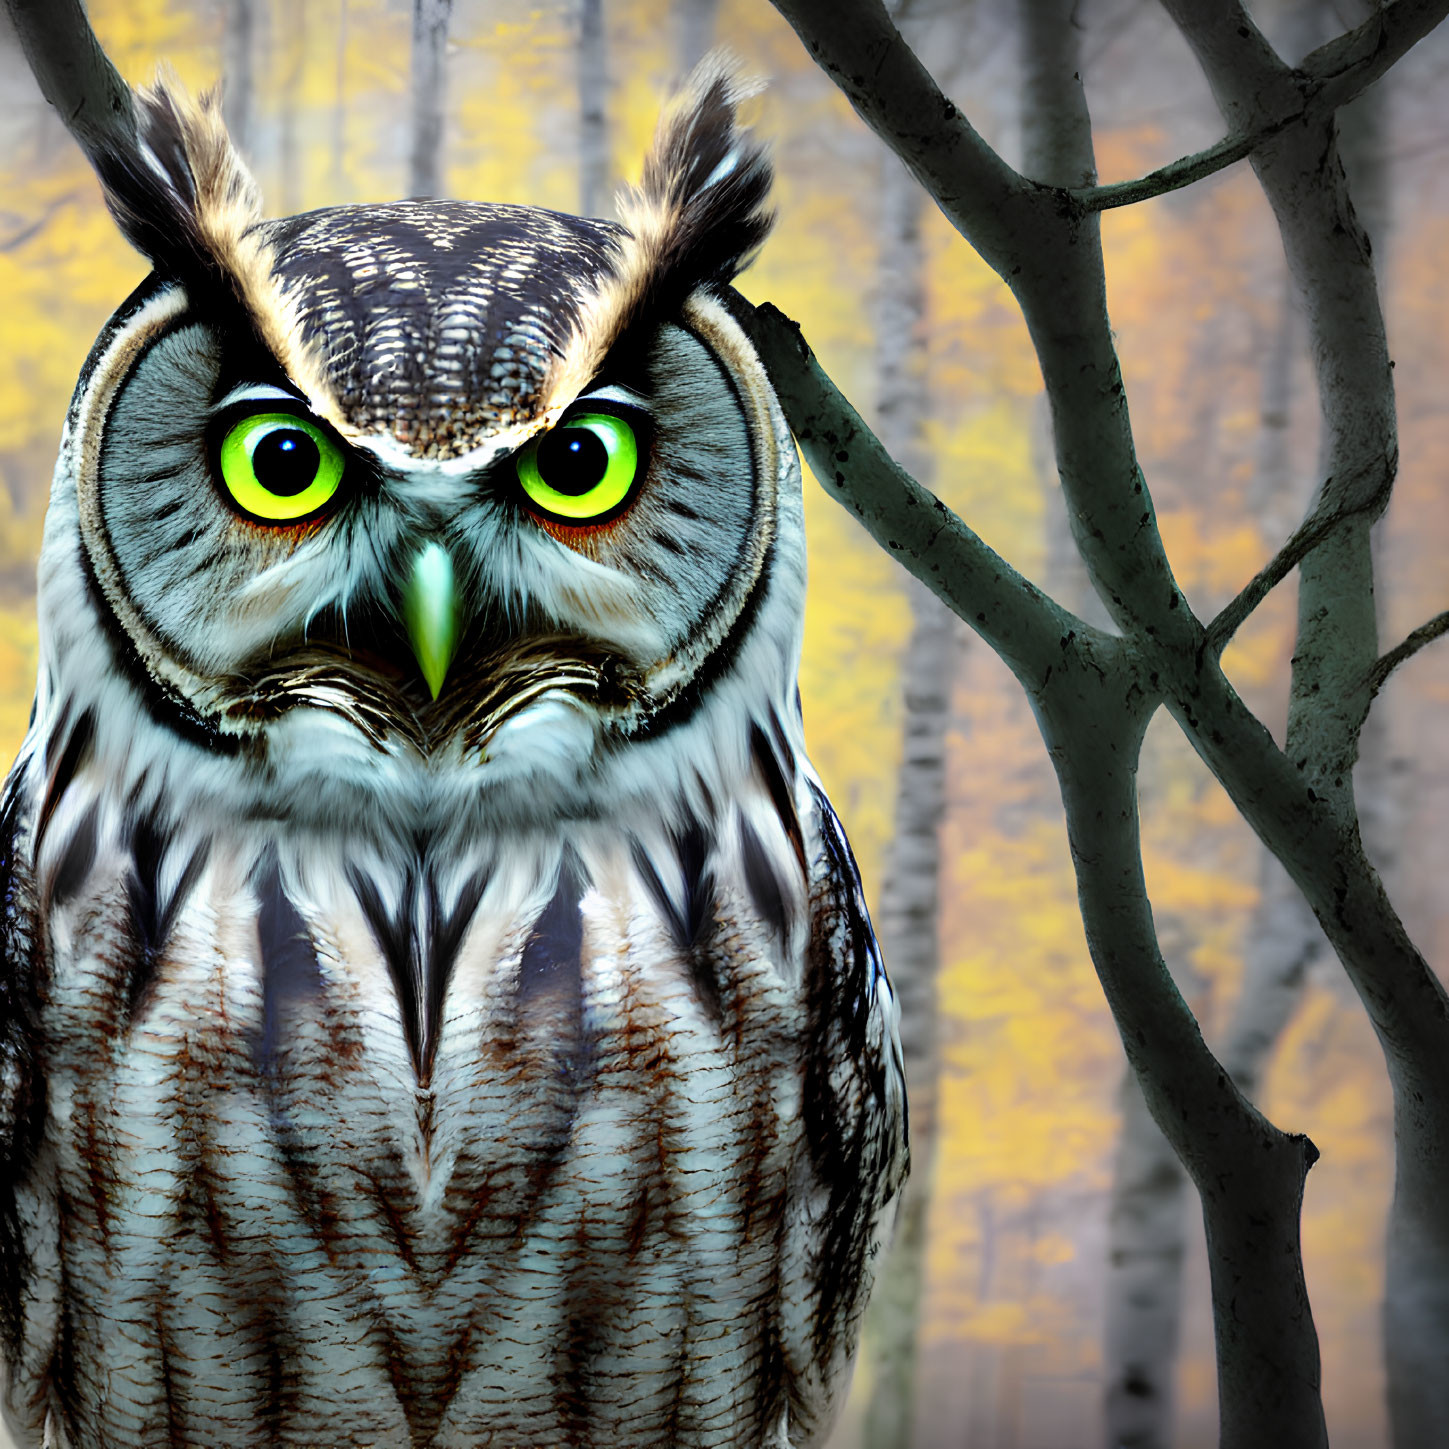 Detailed Owl Illustration with Intense Green Eyes in Forest Scene